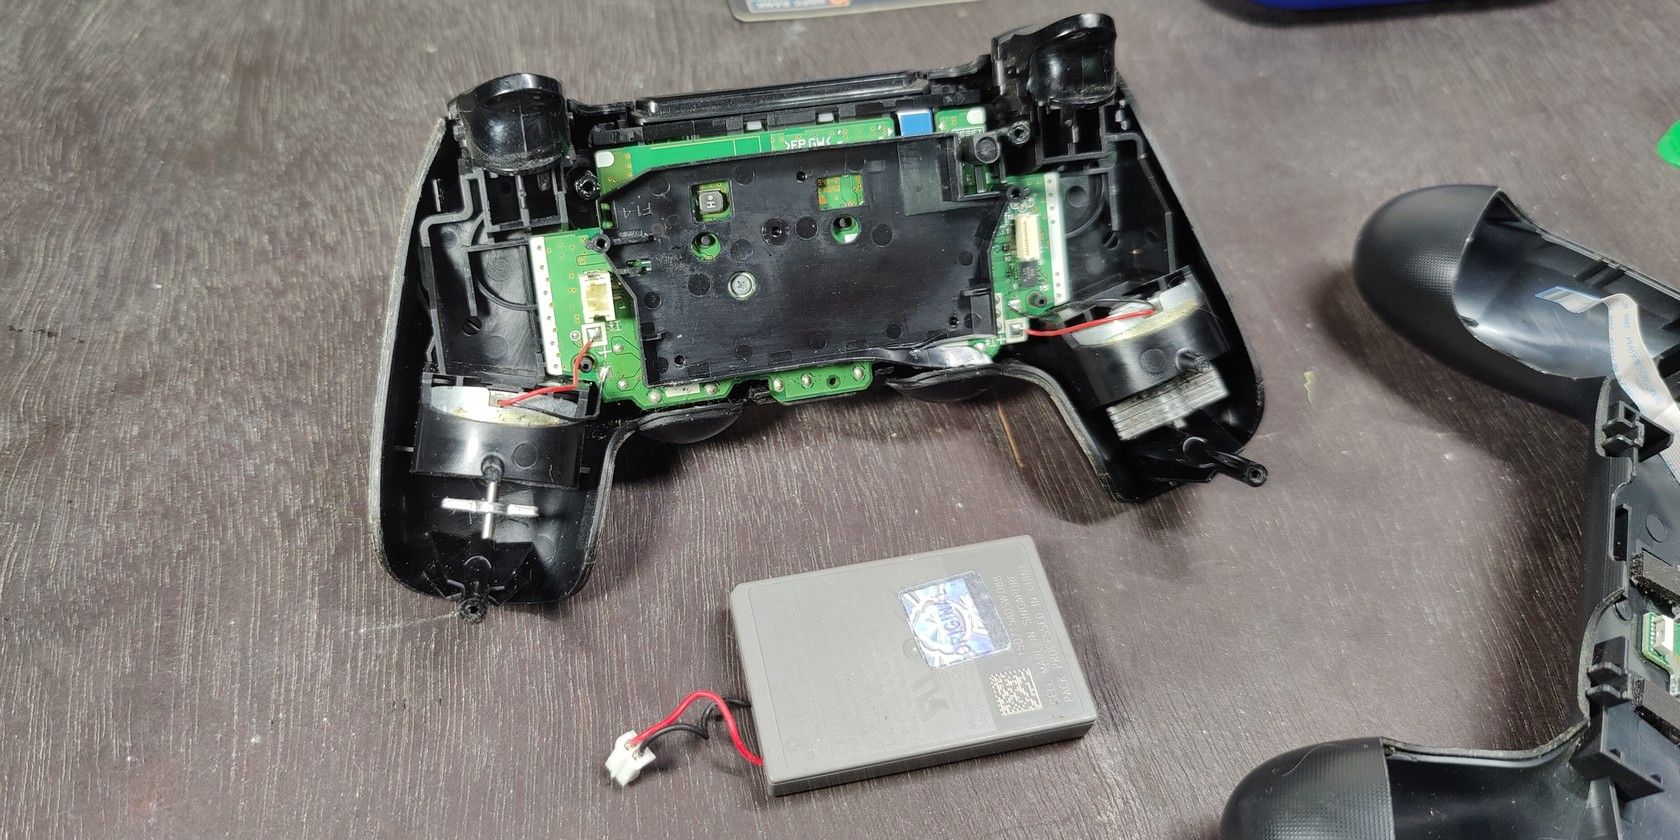  Ps4 Controller Battery Replacement